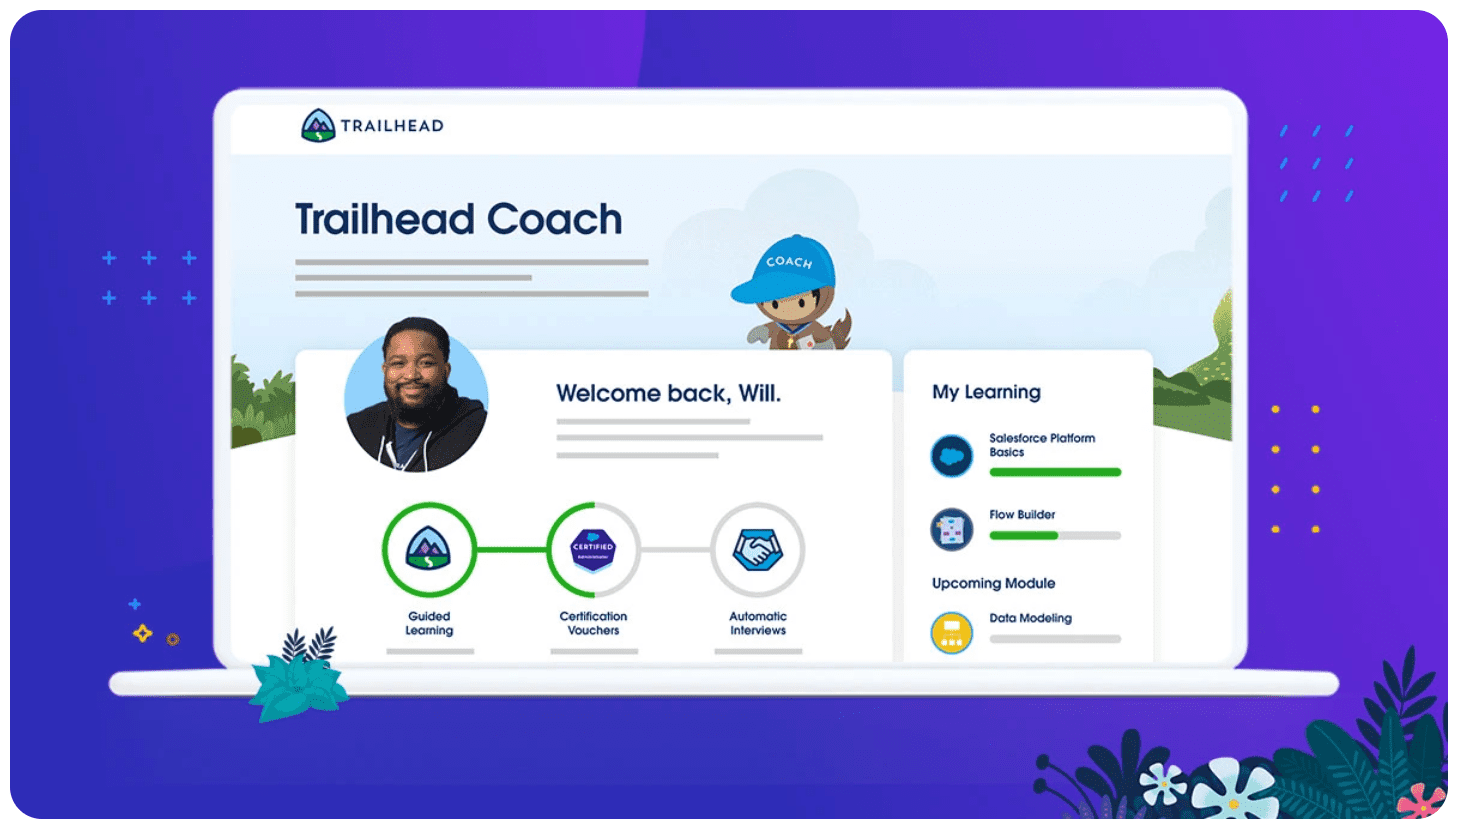 What is Trailhead Coach from Salesforce?